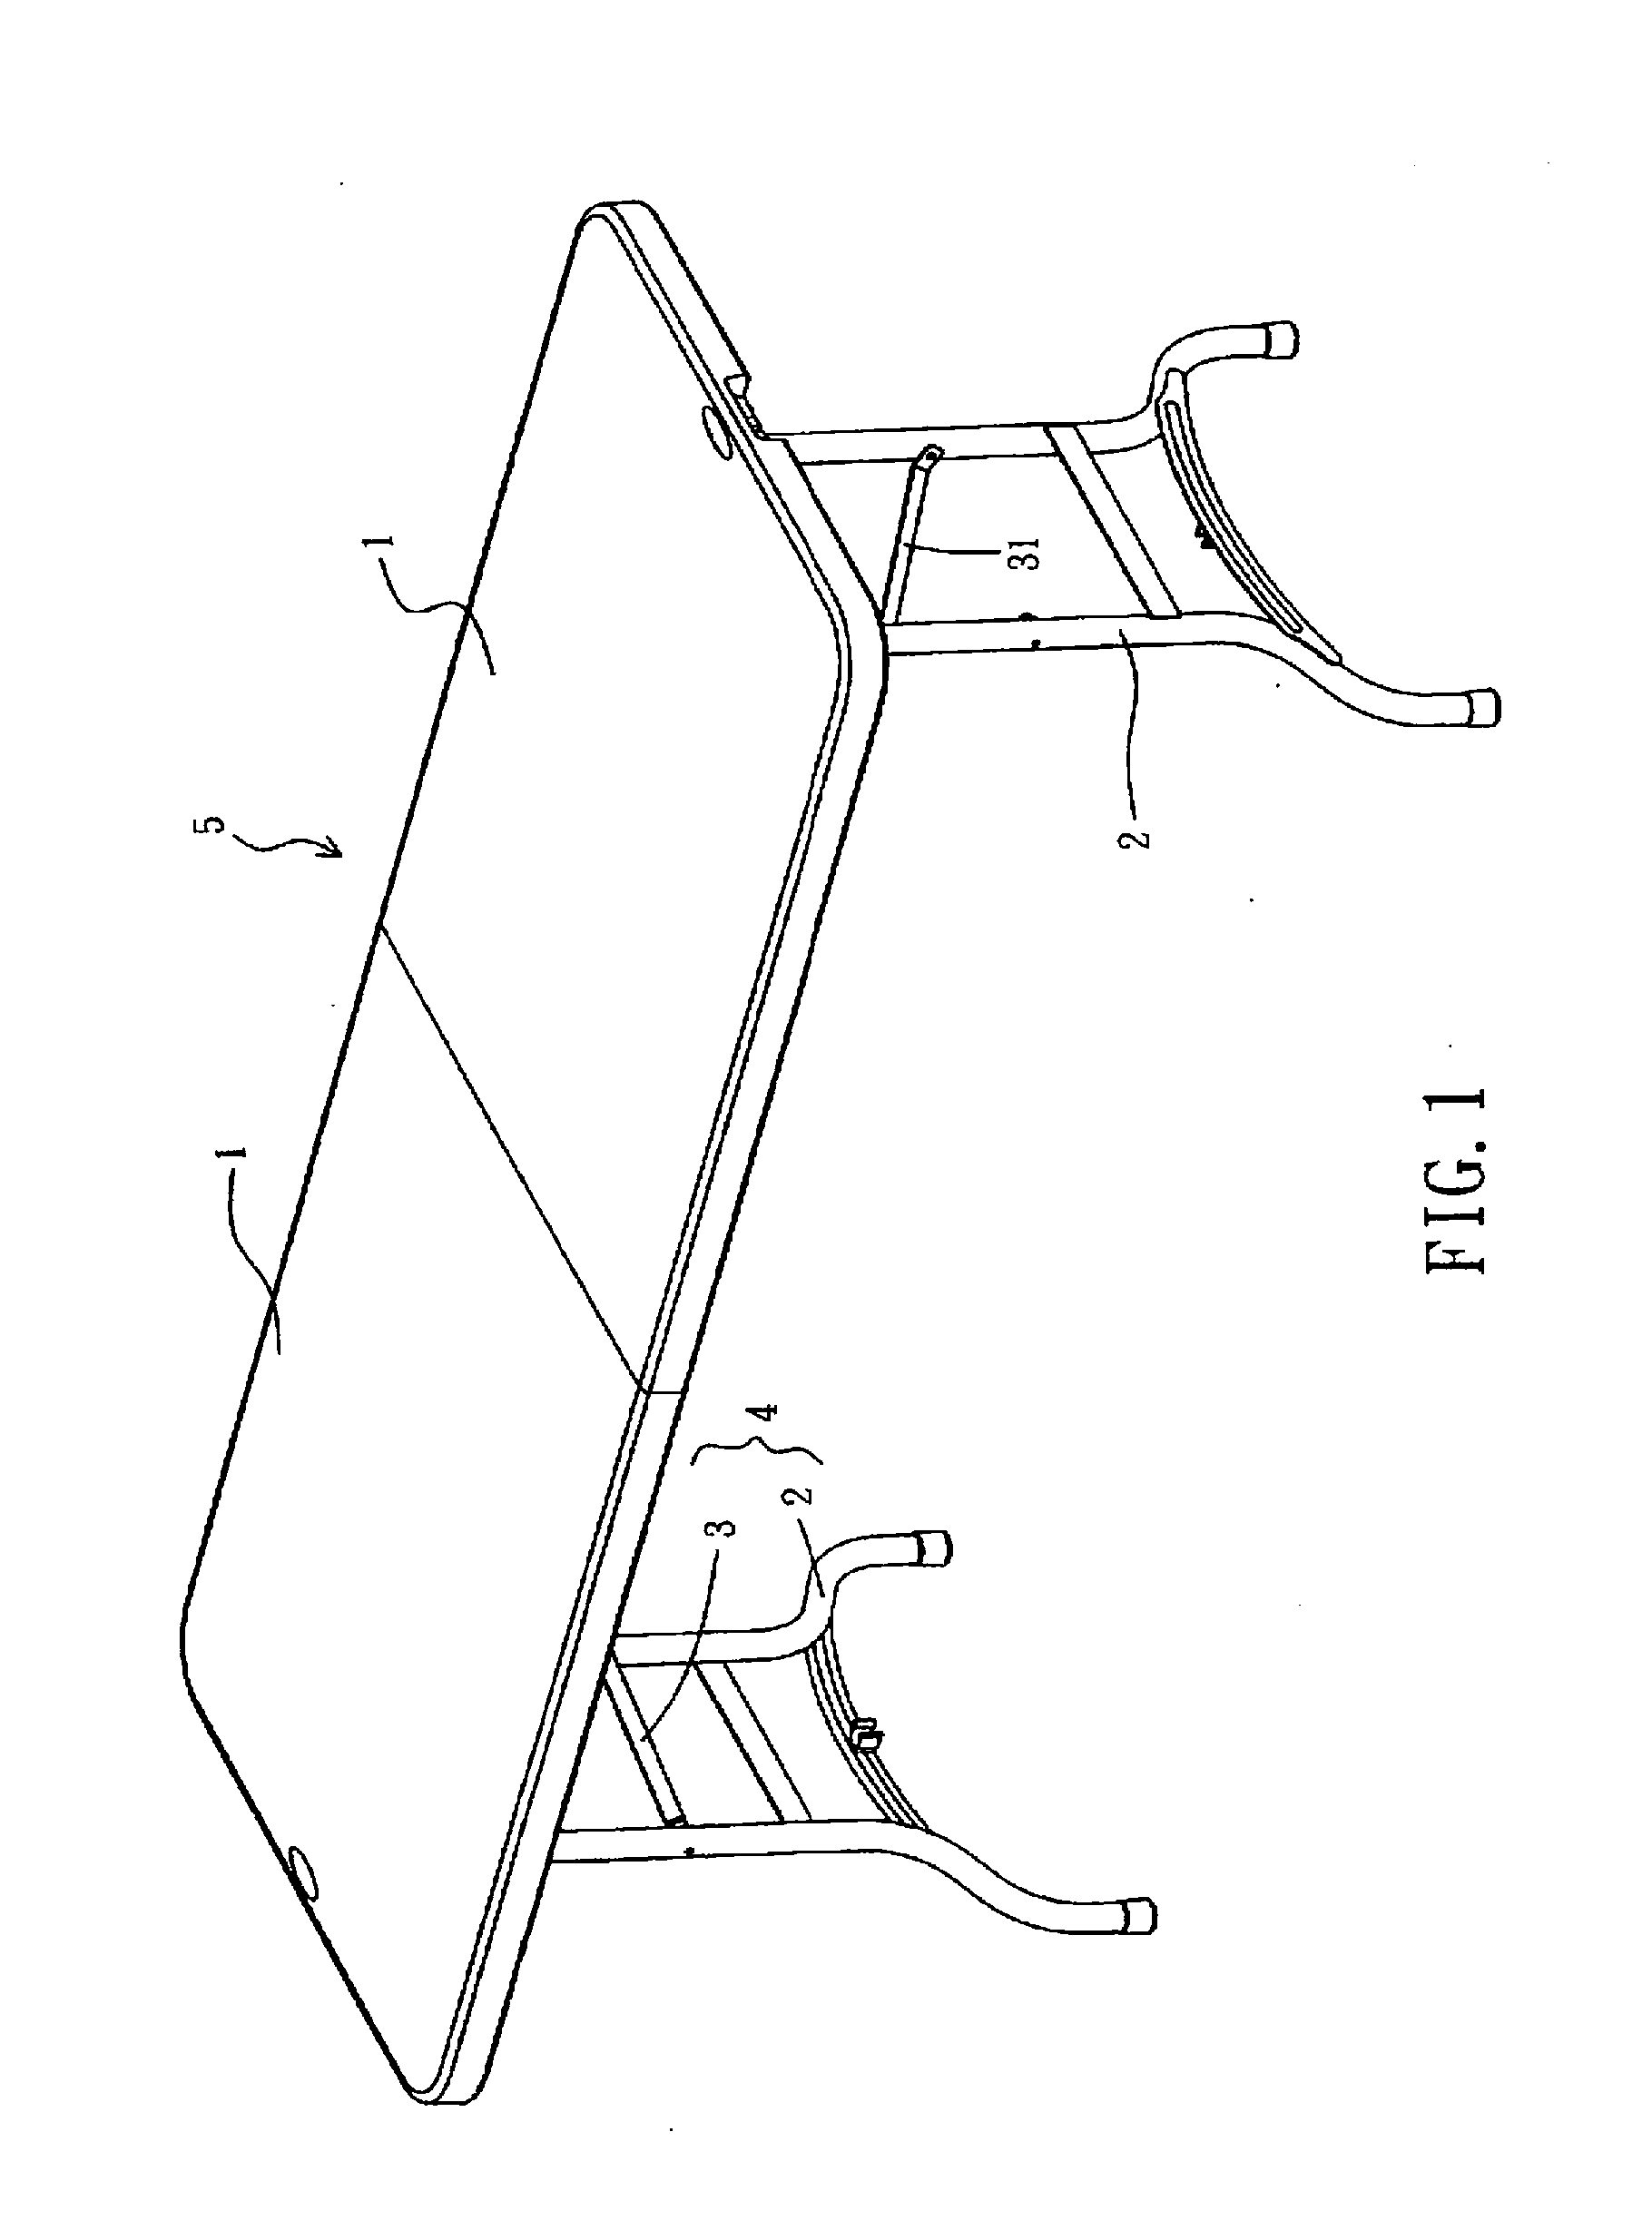 Latching mechanism for foldable table